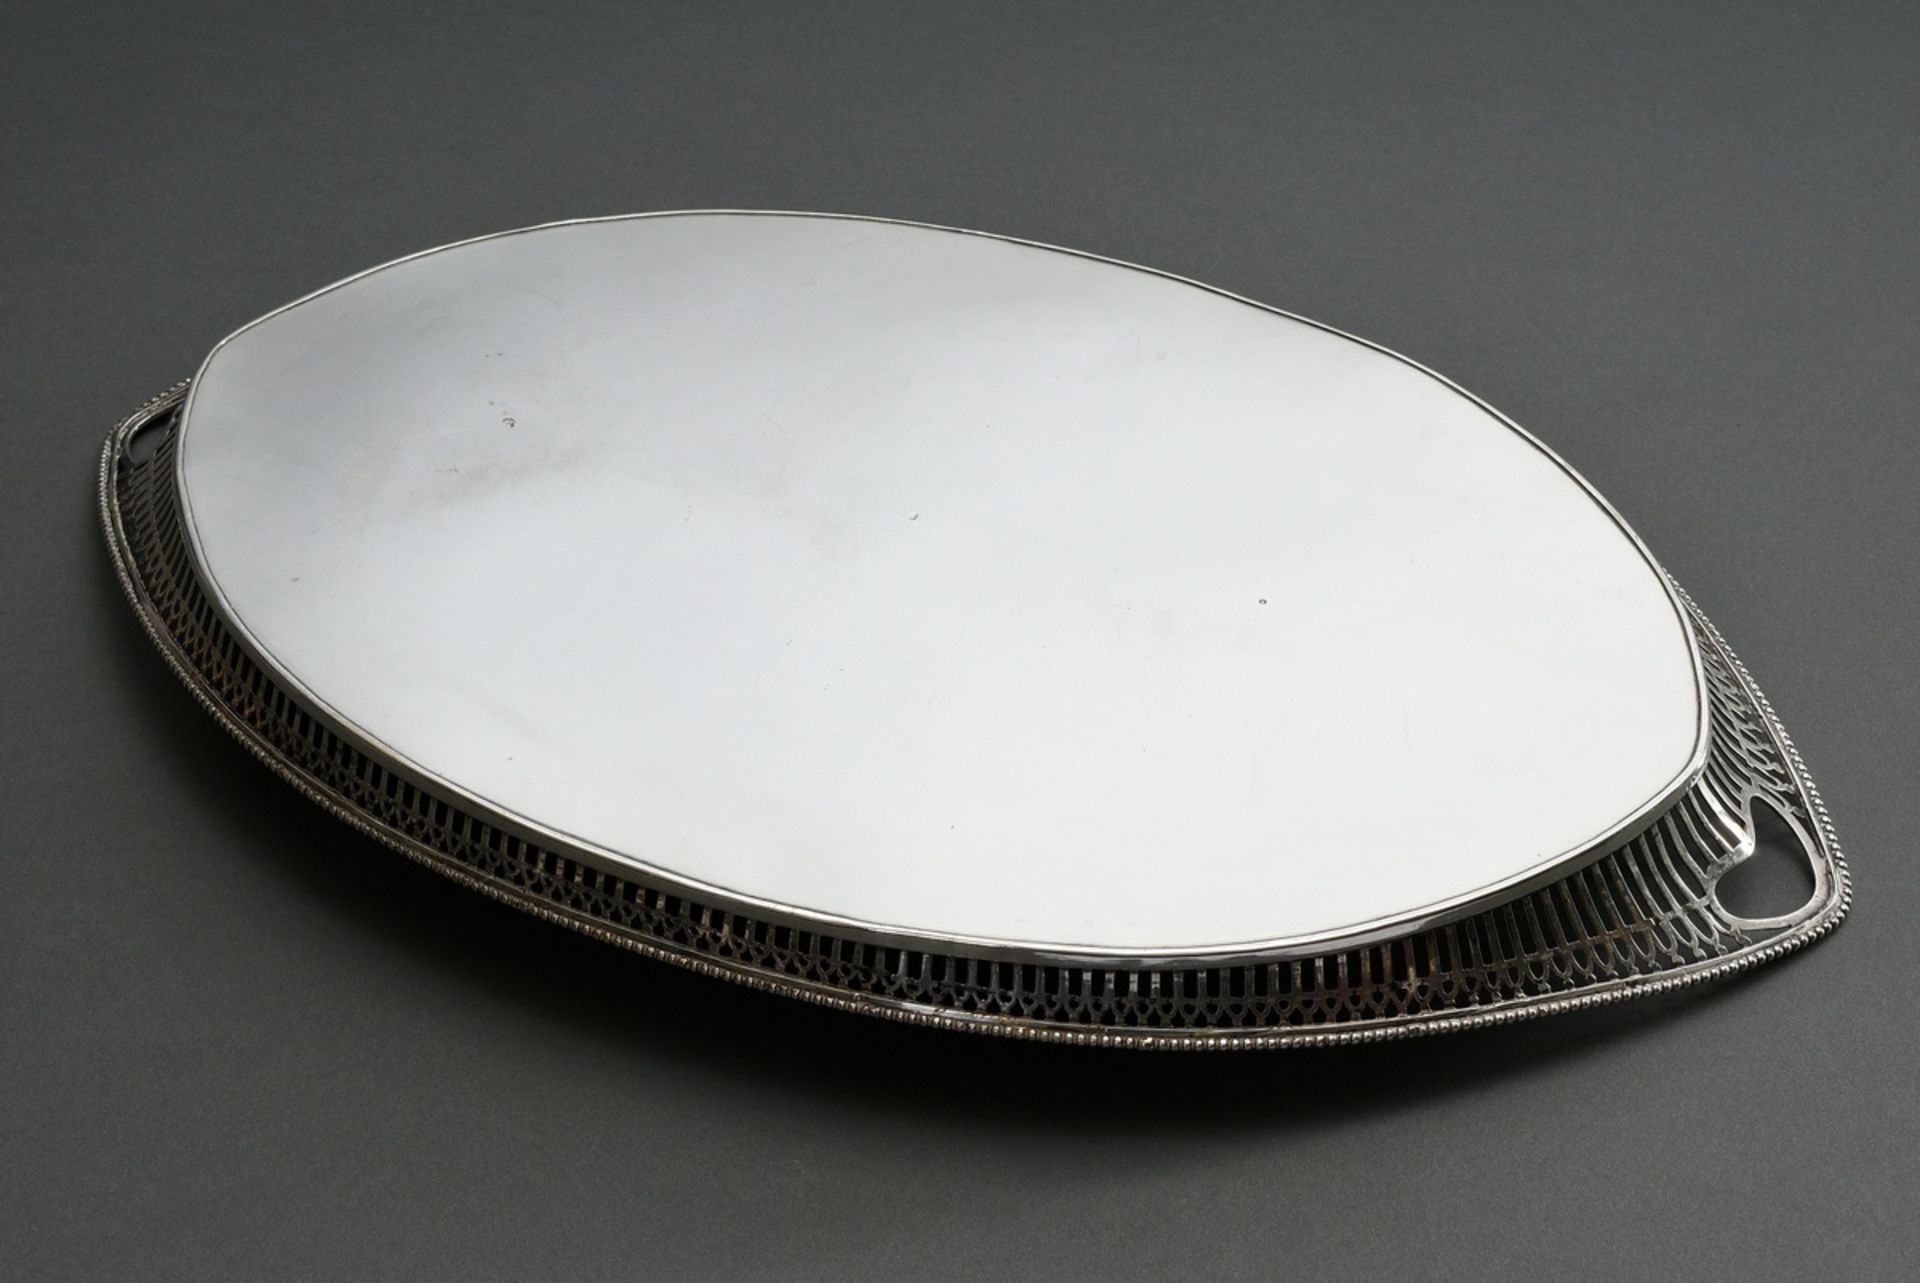 Dutch tray with lattice opening and beaded rim, MM: JdV (?), year mark 1915, silver 833, 1480g, 56x - Image 2 of 5